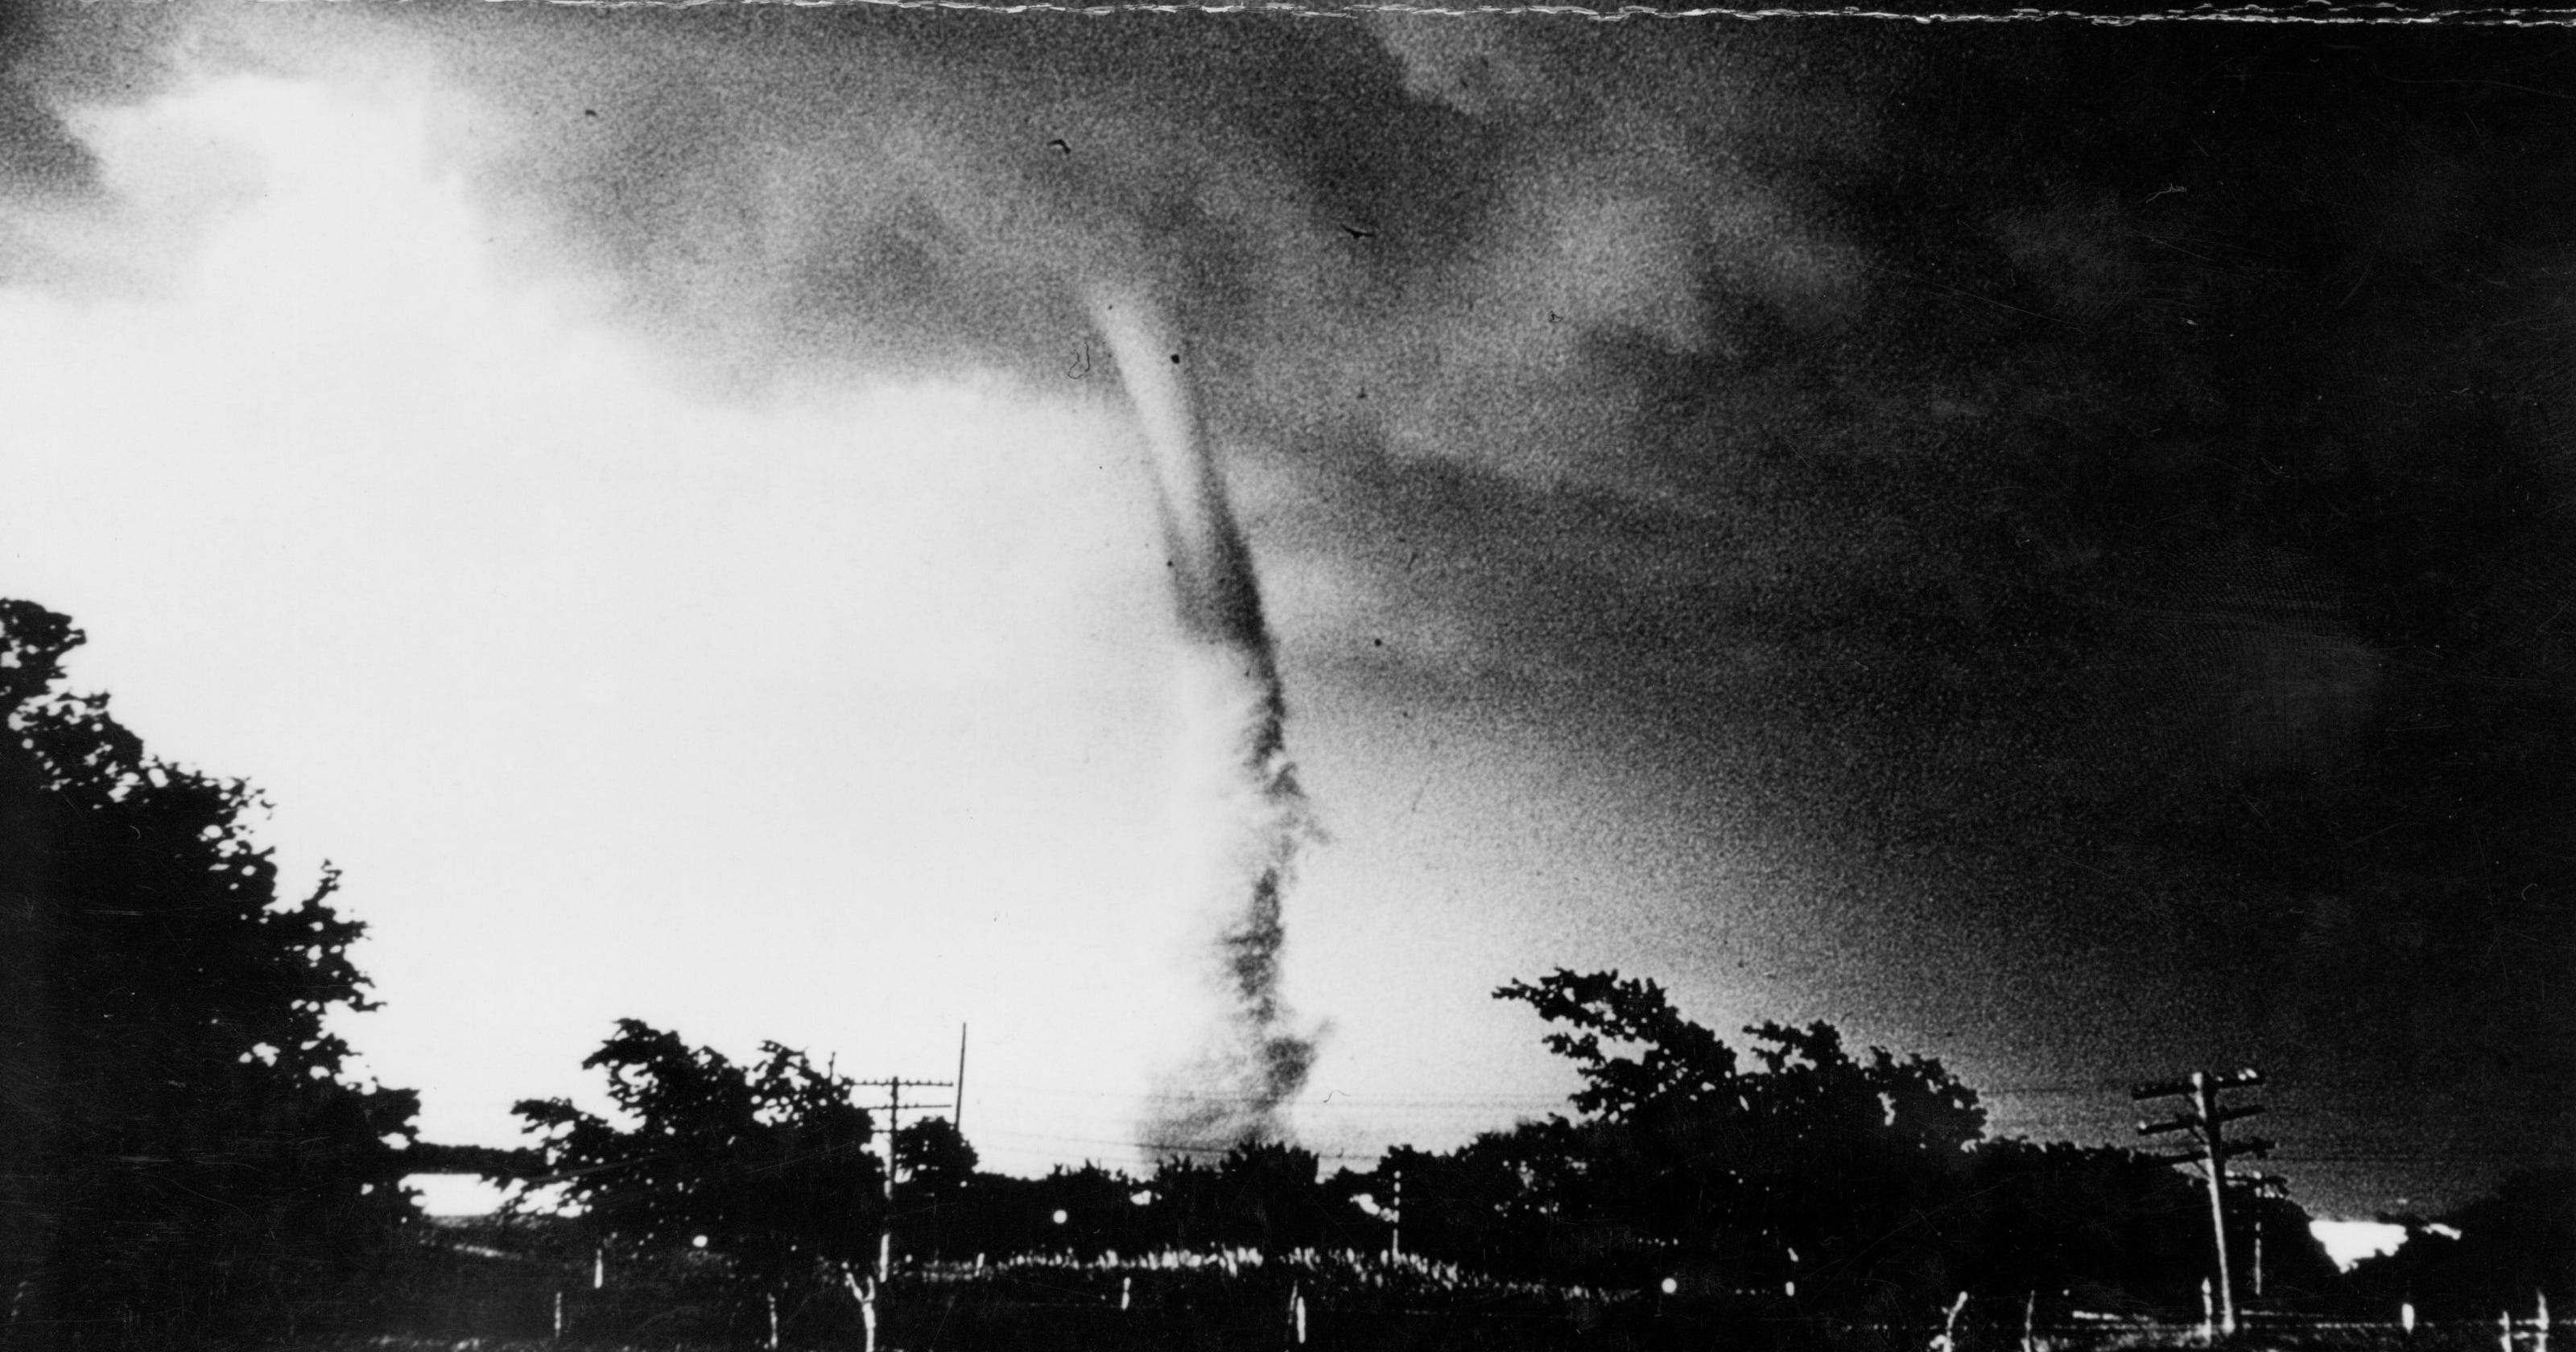 The day of the tornado